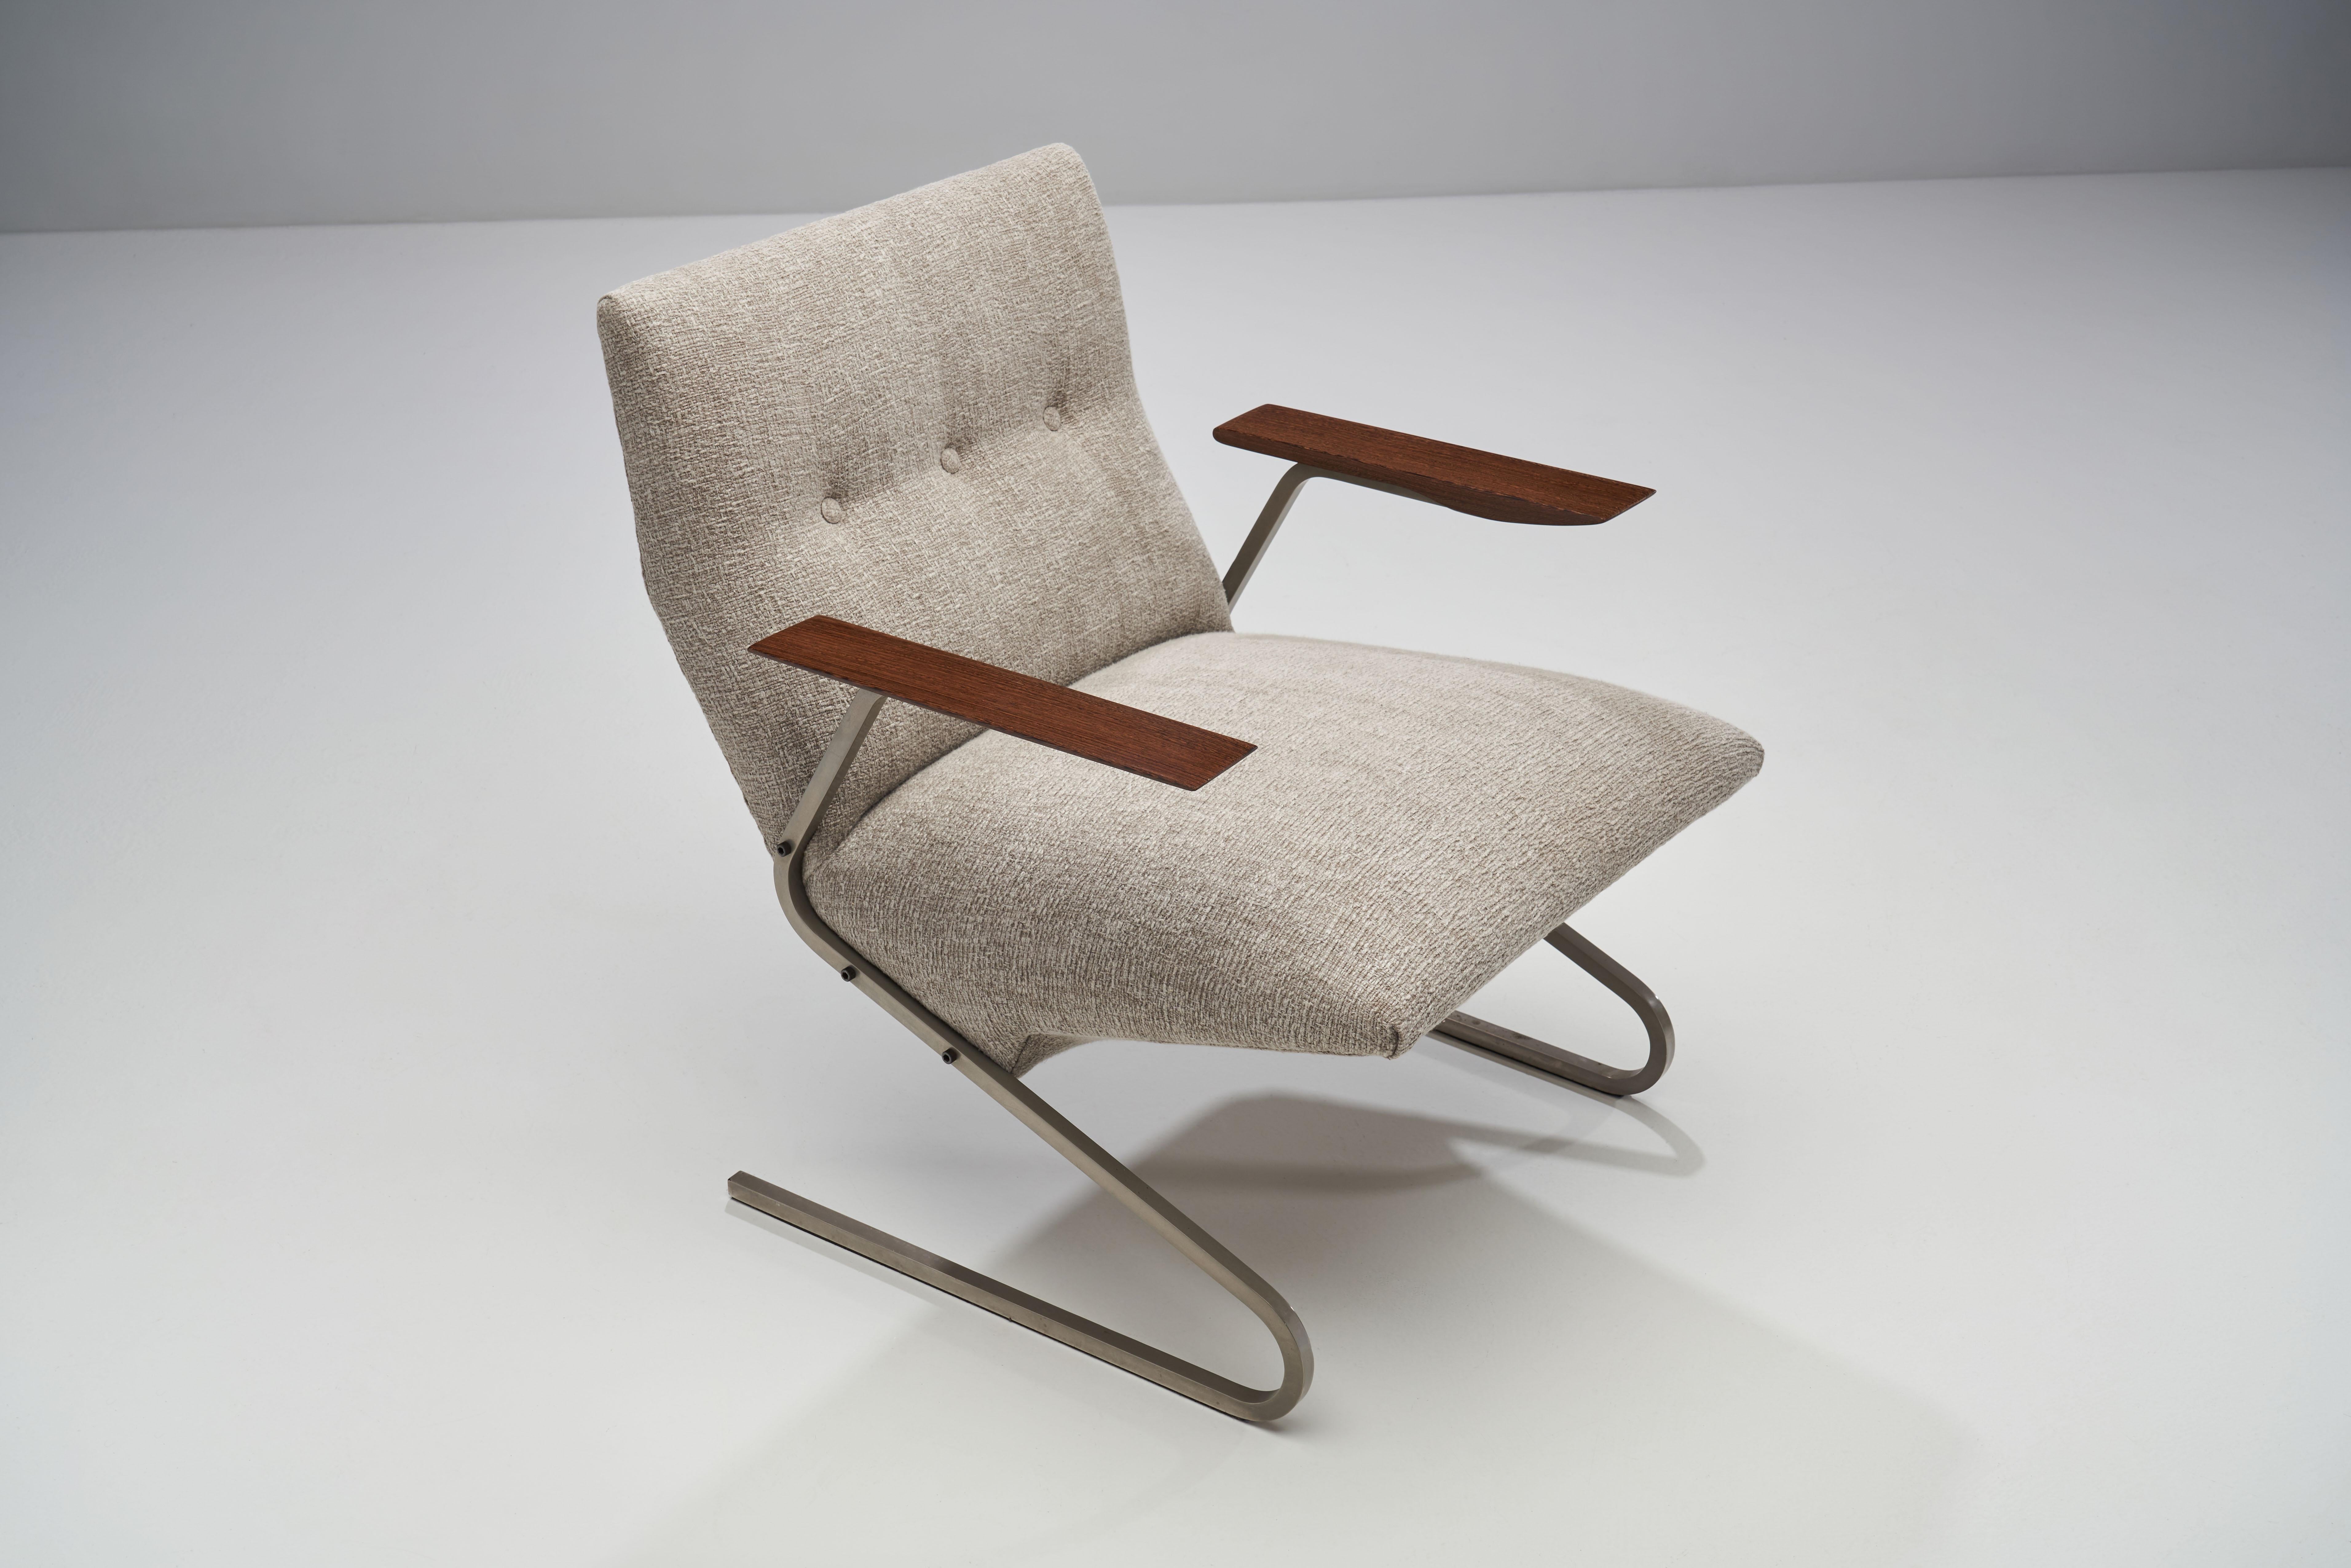 Mid-20th Century “Cantilever” Armchair by George Van Rijck for Beaufort, Belgium, 1960s